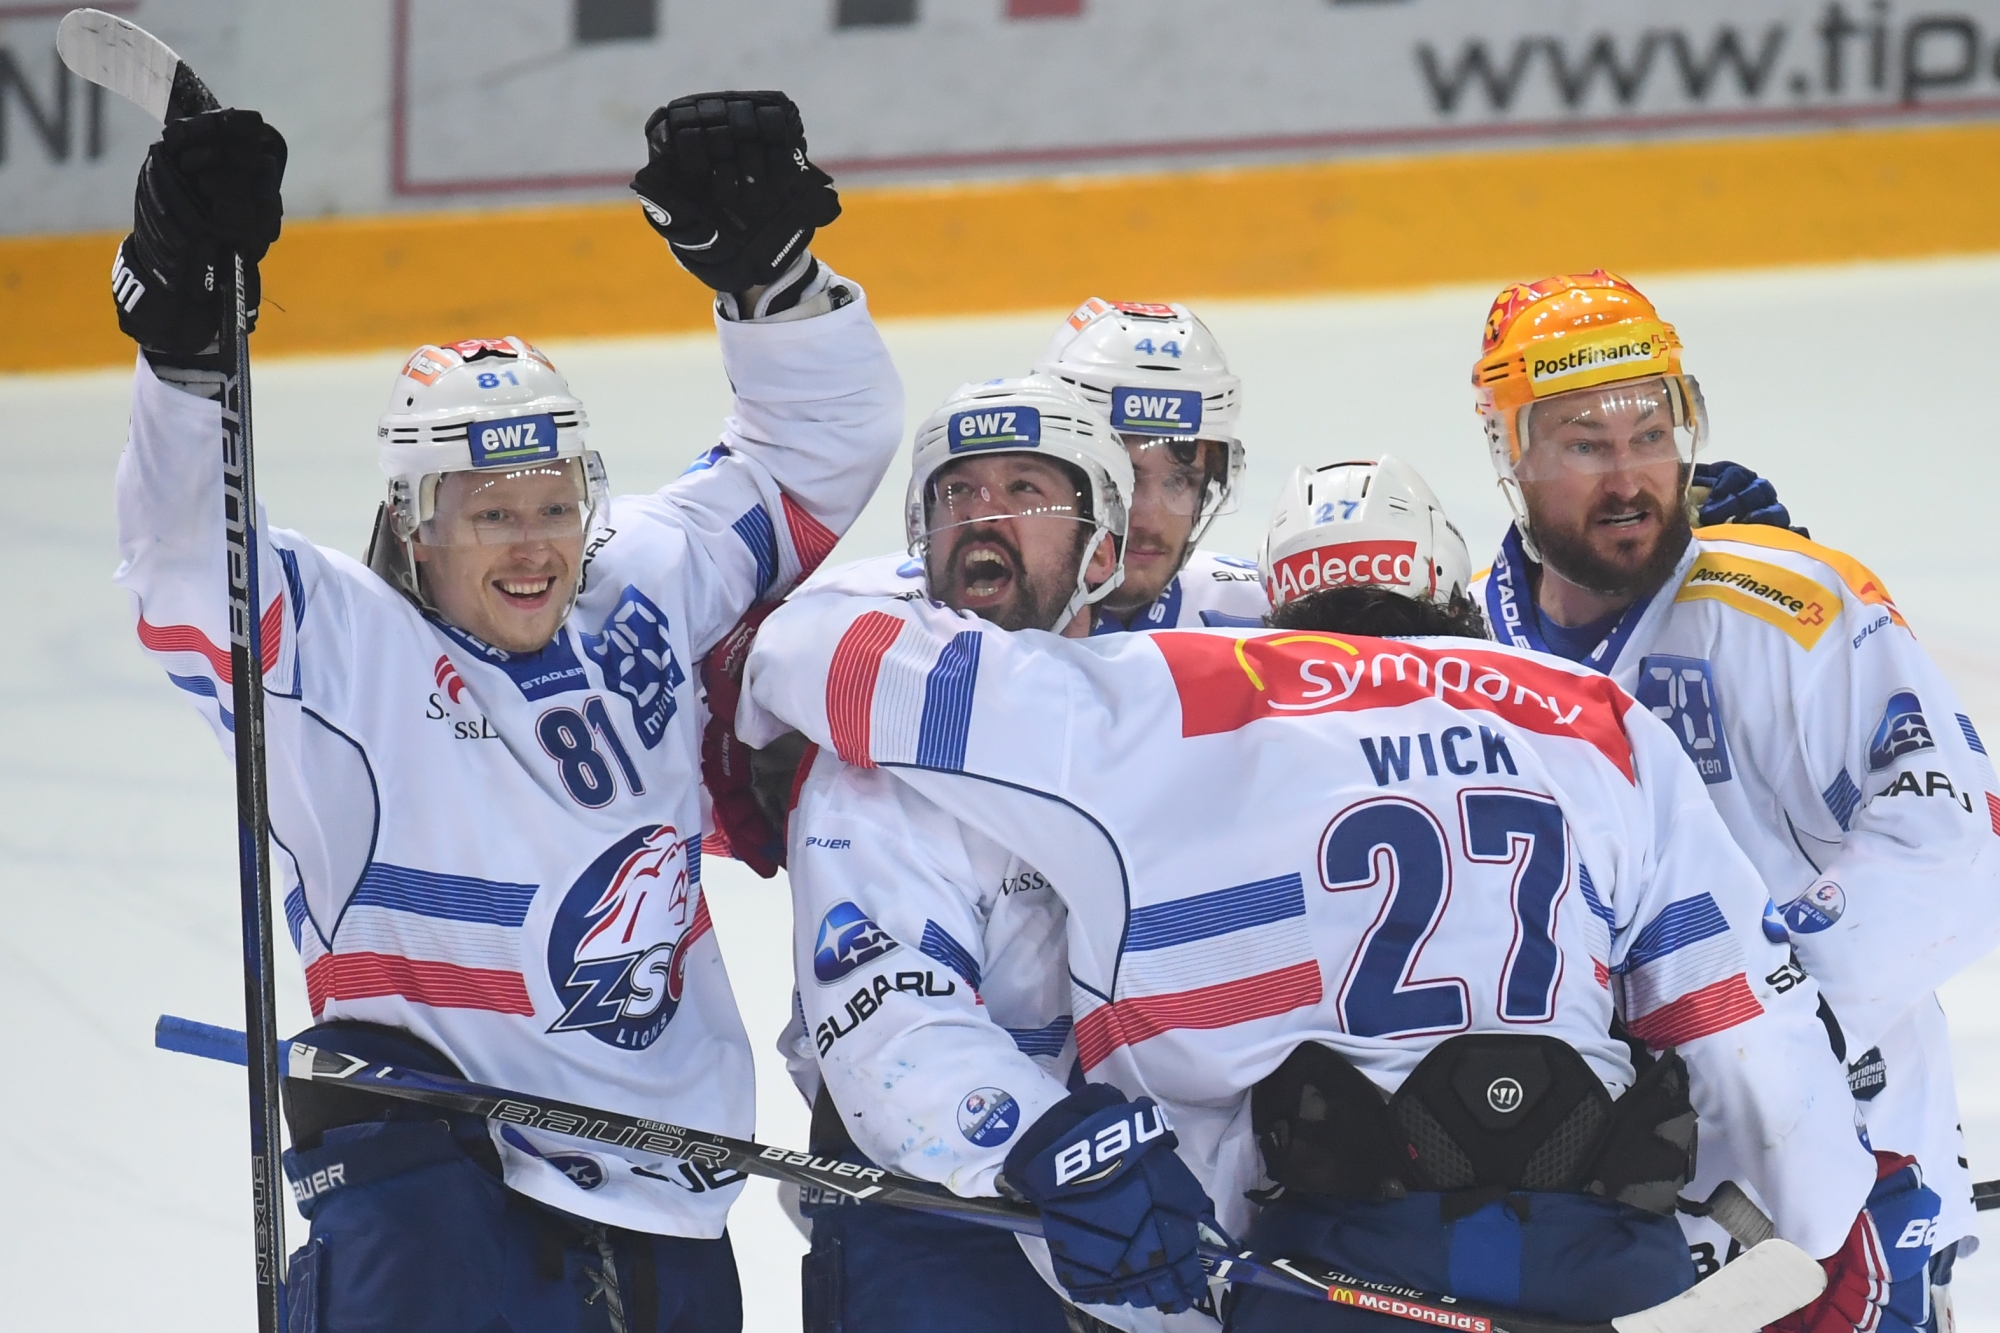 Zurich's Patrick Geering, center, and Zurich's Ronalds Kenins, left, celebrate the 0-2 goal with their teammates, during the seventh match of the playoff final of the National League of the ice hockey Swiss Championship between the HC Lugano and the ZSC Lions, at the ice stadium Resega in Lugano, on Friday, April 27, 2018. (KEYSTONE/Ti-Press/Alessandro Crinari) SCHWEIZ EISHOCKEY PLAYOFF FINAL LUGANO ZSC